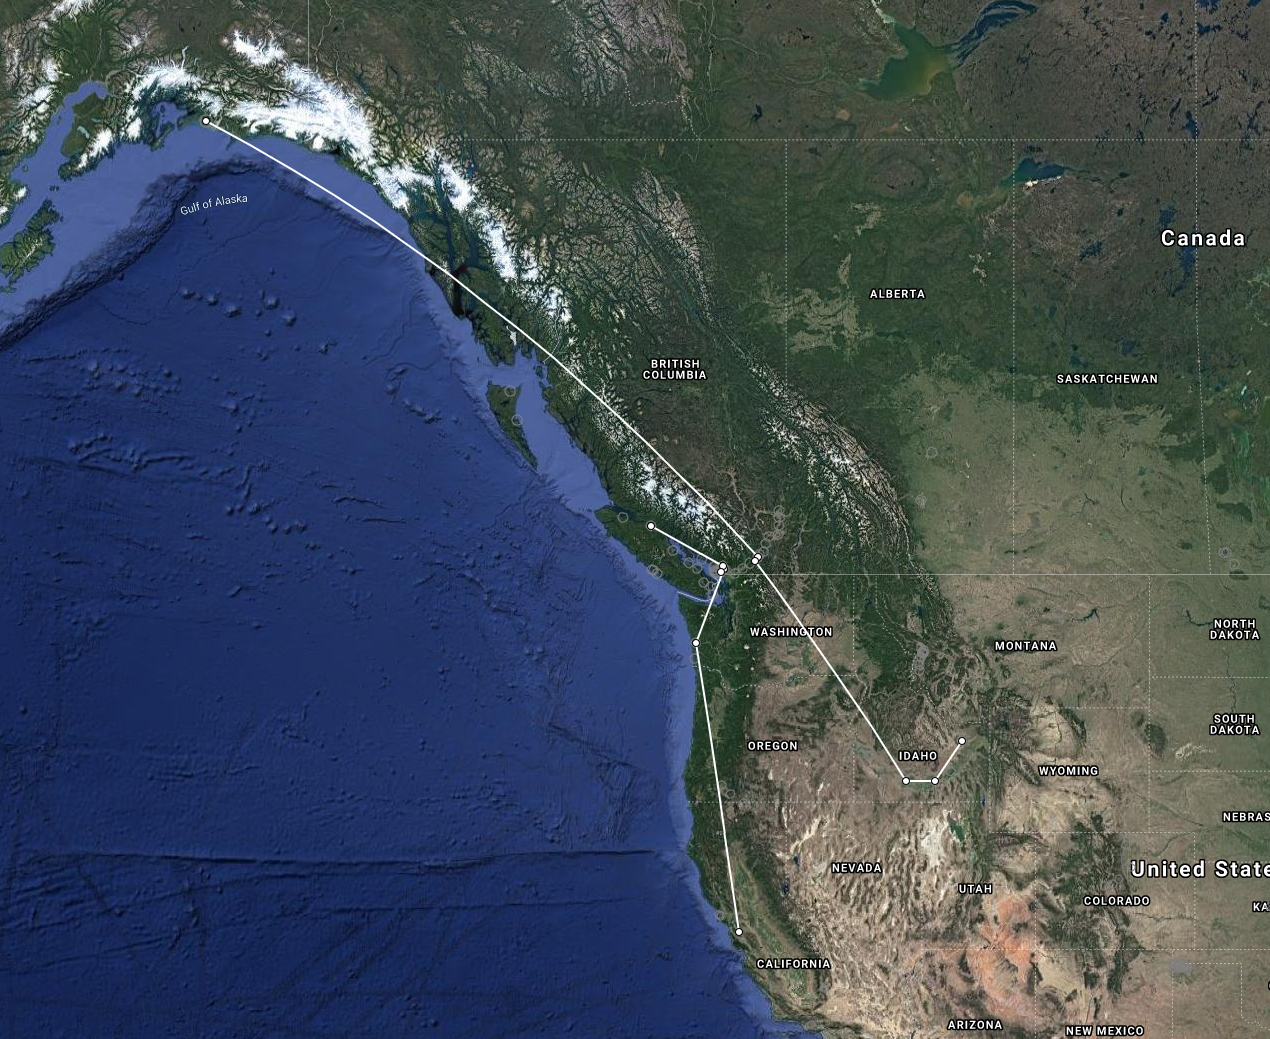 the map shows a point in california, a point along the washington coast, and two points along vancouver island during spring migration. Then during fall migration it shows a point along the coast of southern alaska, then a point in southern british columbia, and three points along the snake river plain in Idaho